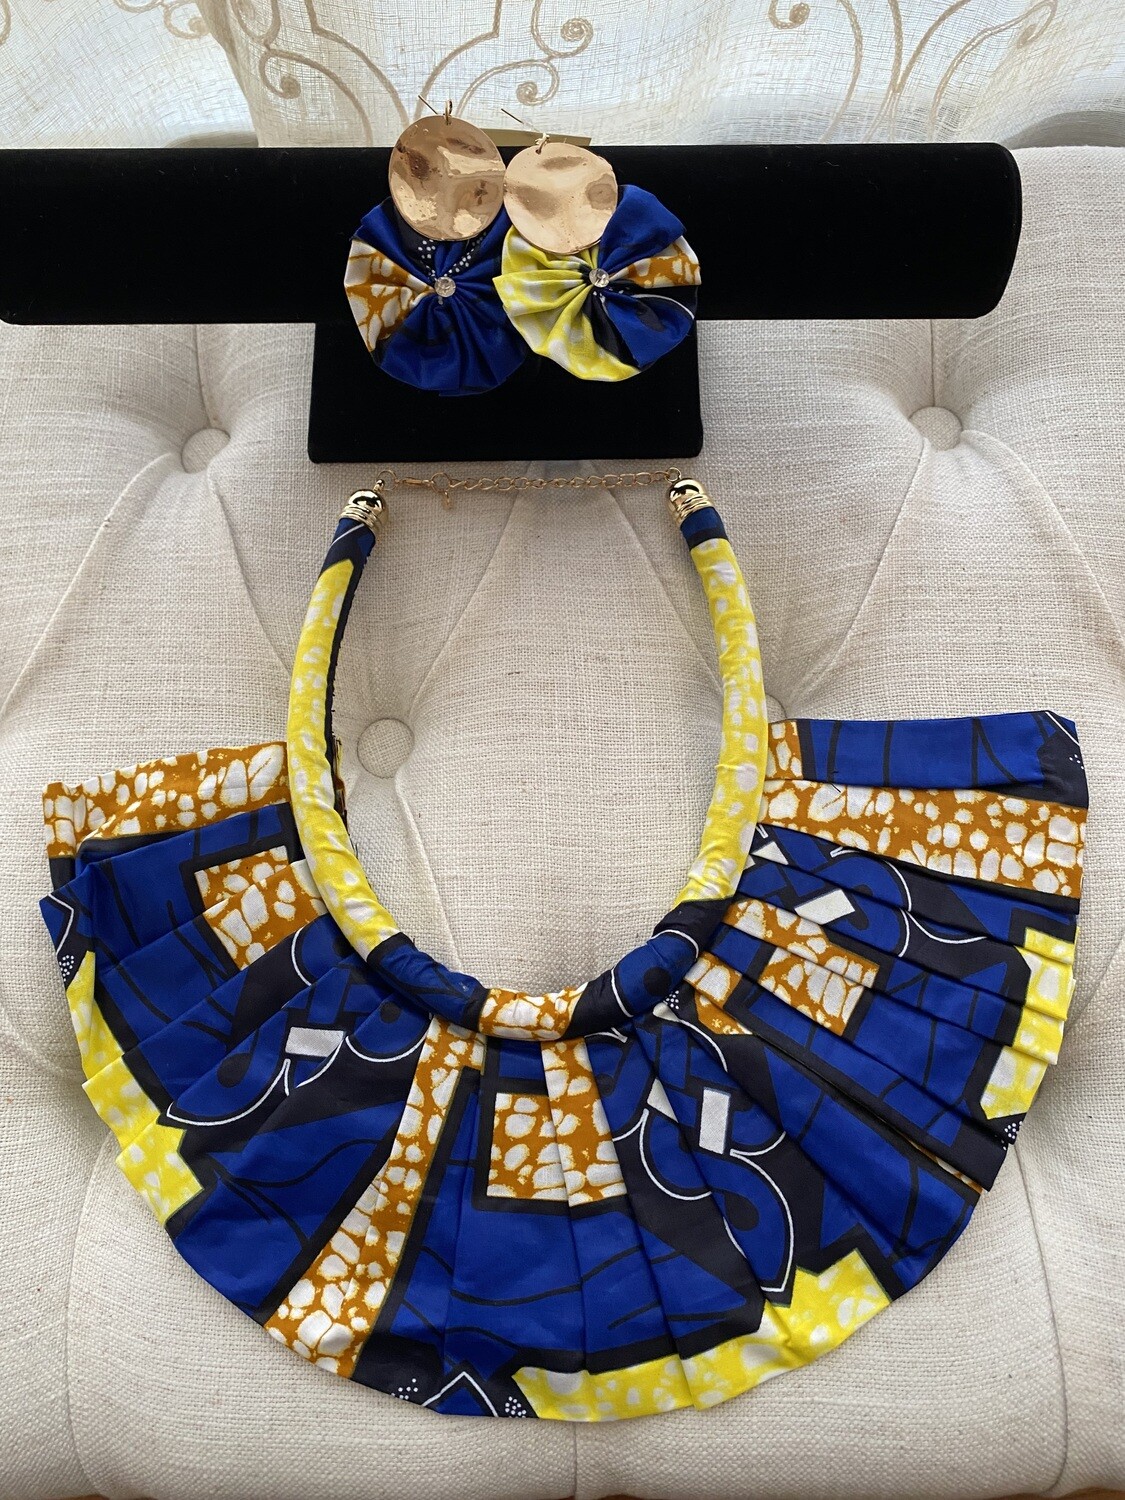 Tribal Pattern Fabric Bib Necklace | Earrings Included| Unique Jewelry | Birthday Gifts| Mothers Day Gifts| Trendy Accessories